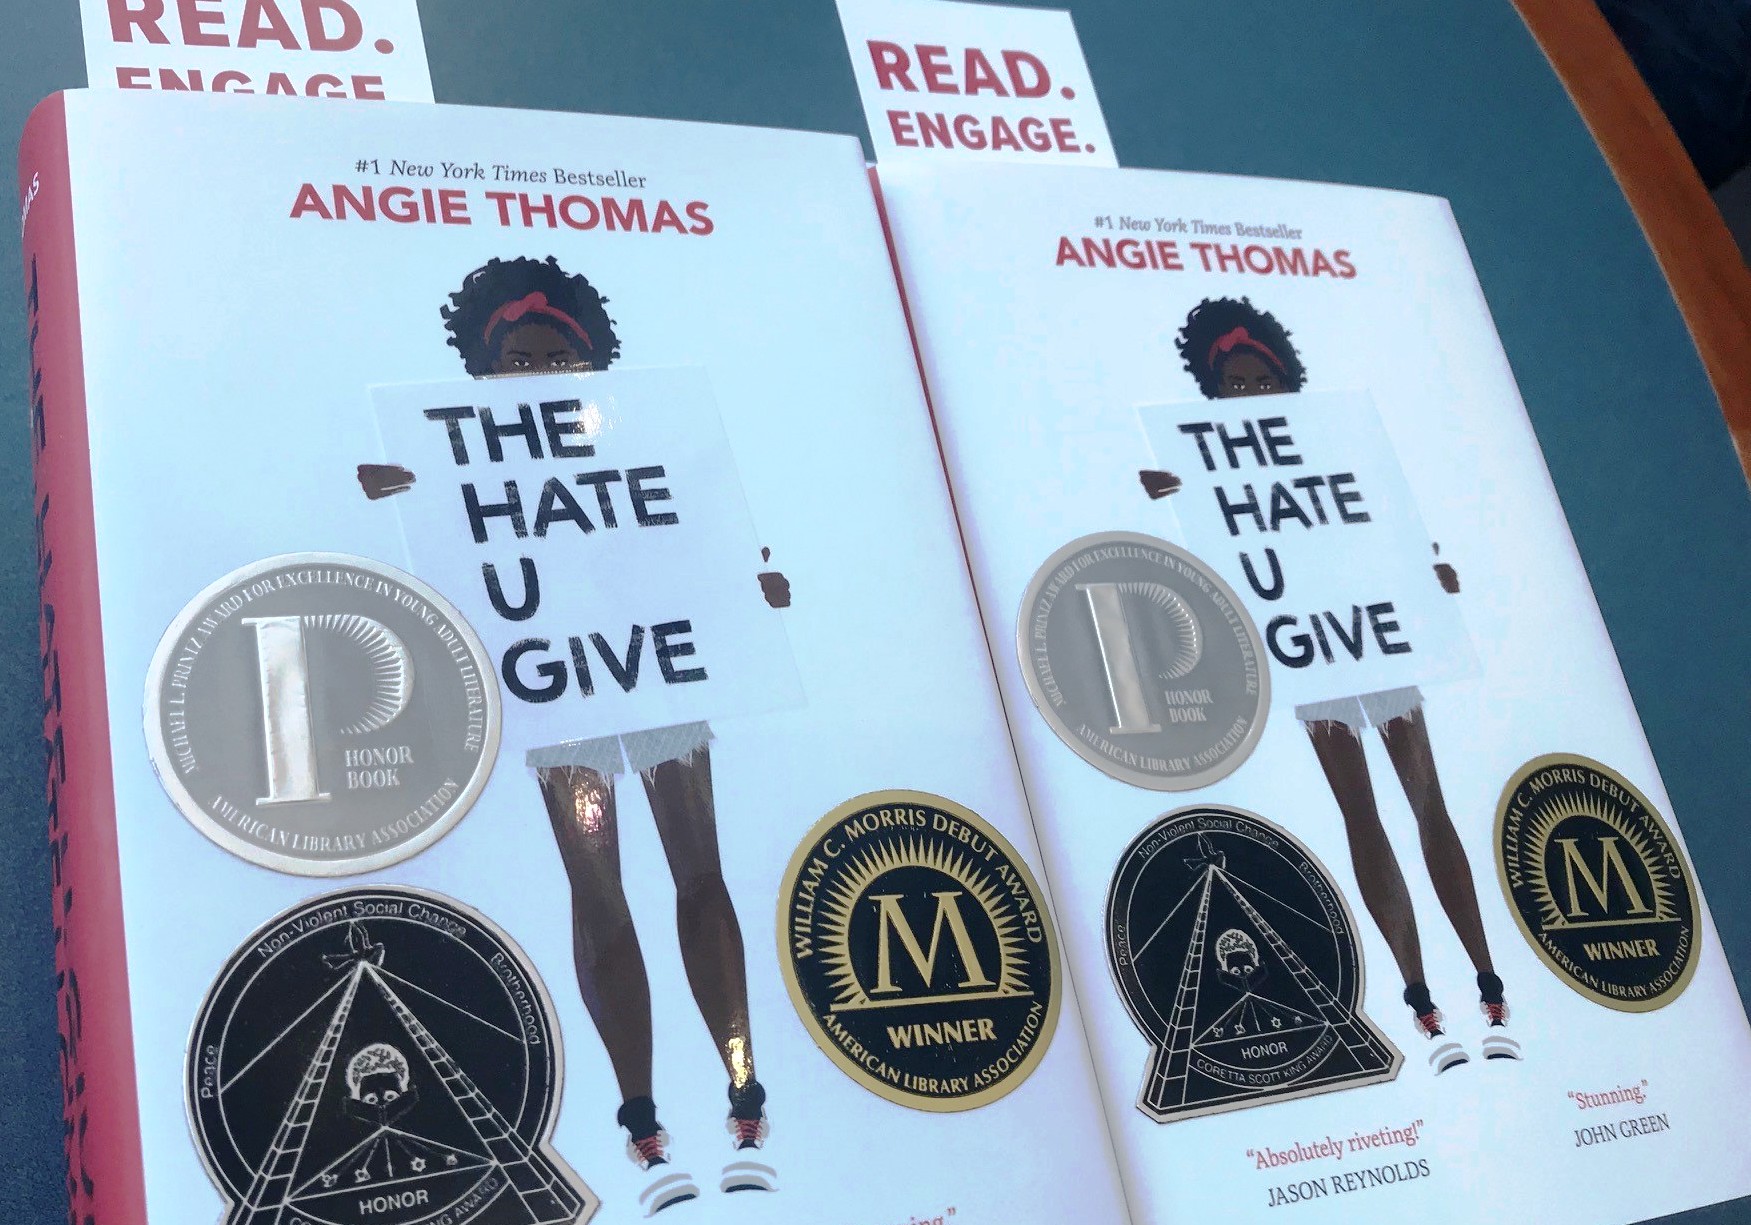 two copies of Angie Thomas' book "The hate u give"